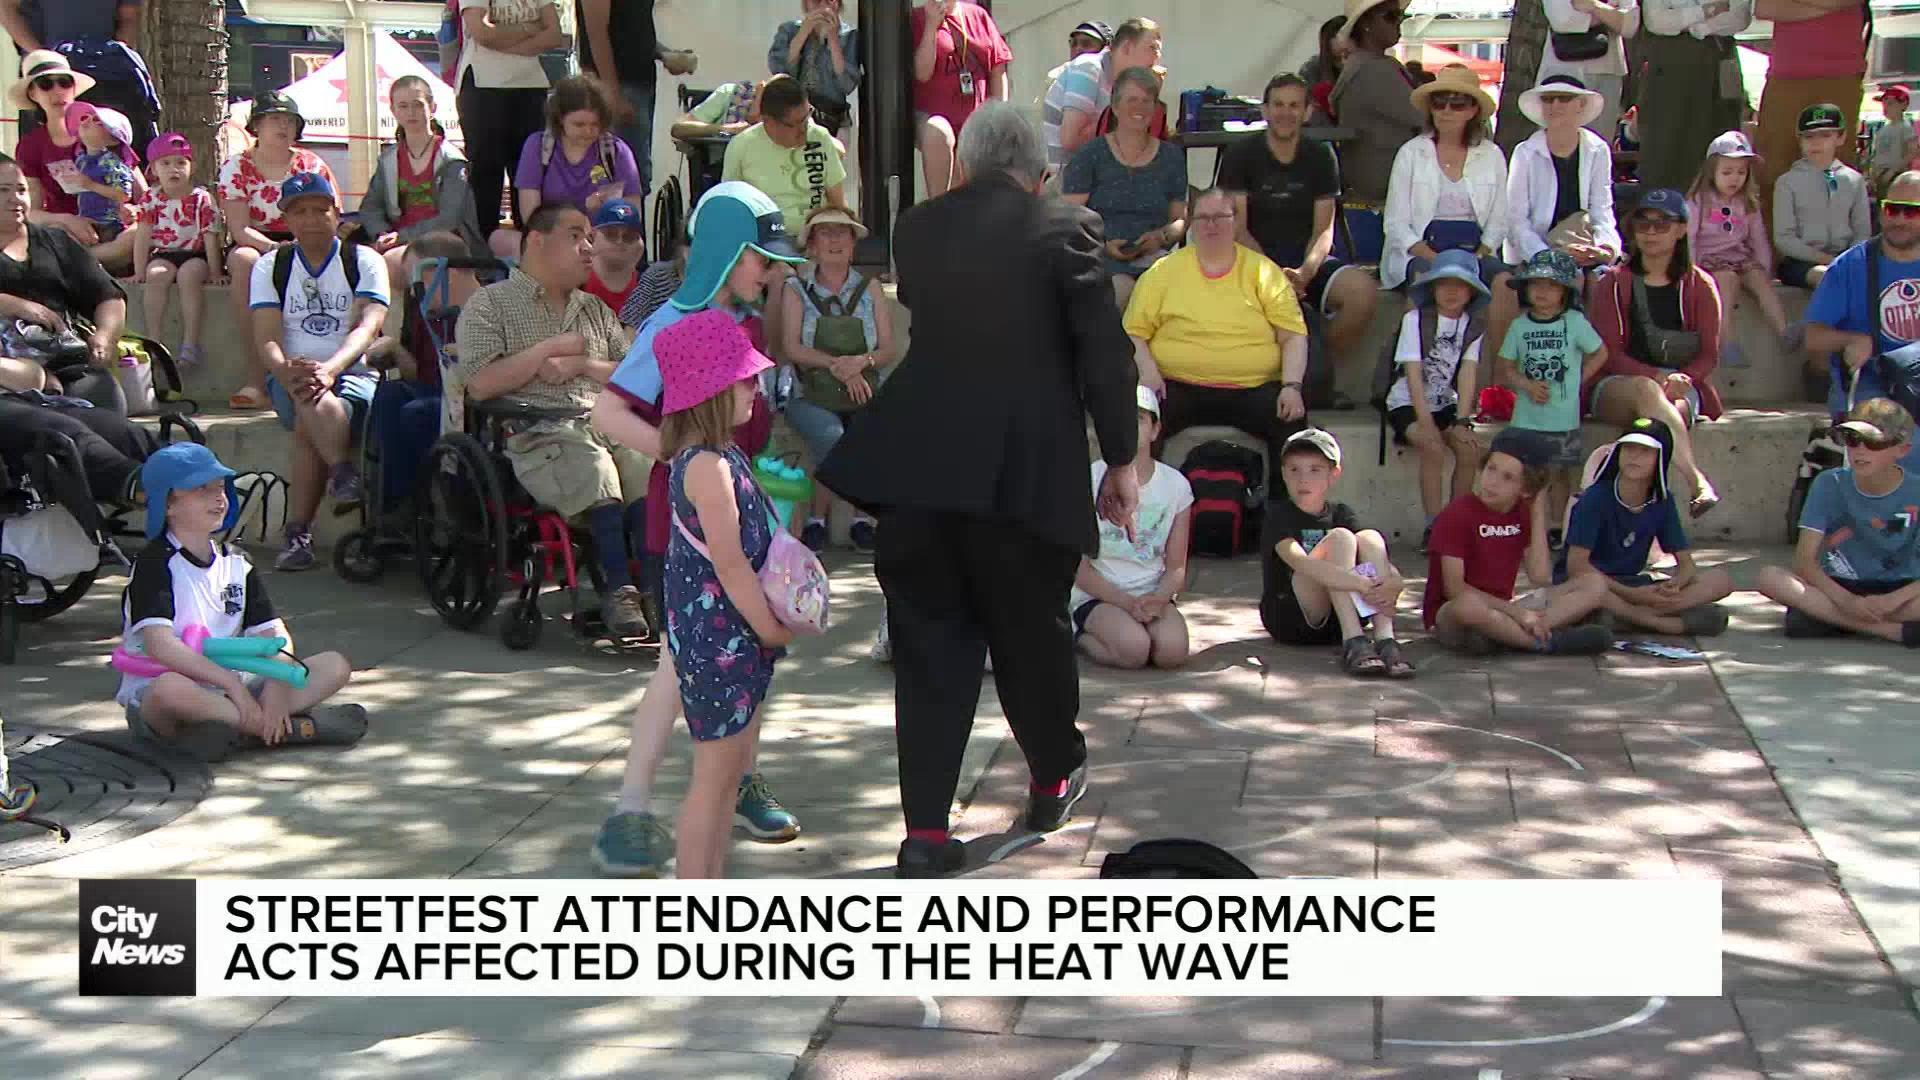 StreetFest attendance and performance acts affected during the heat wave